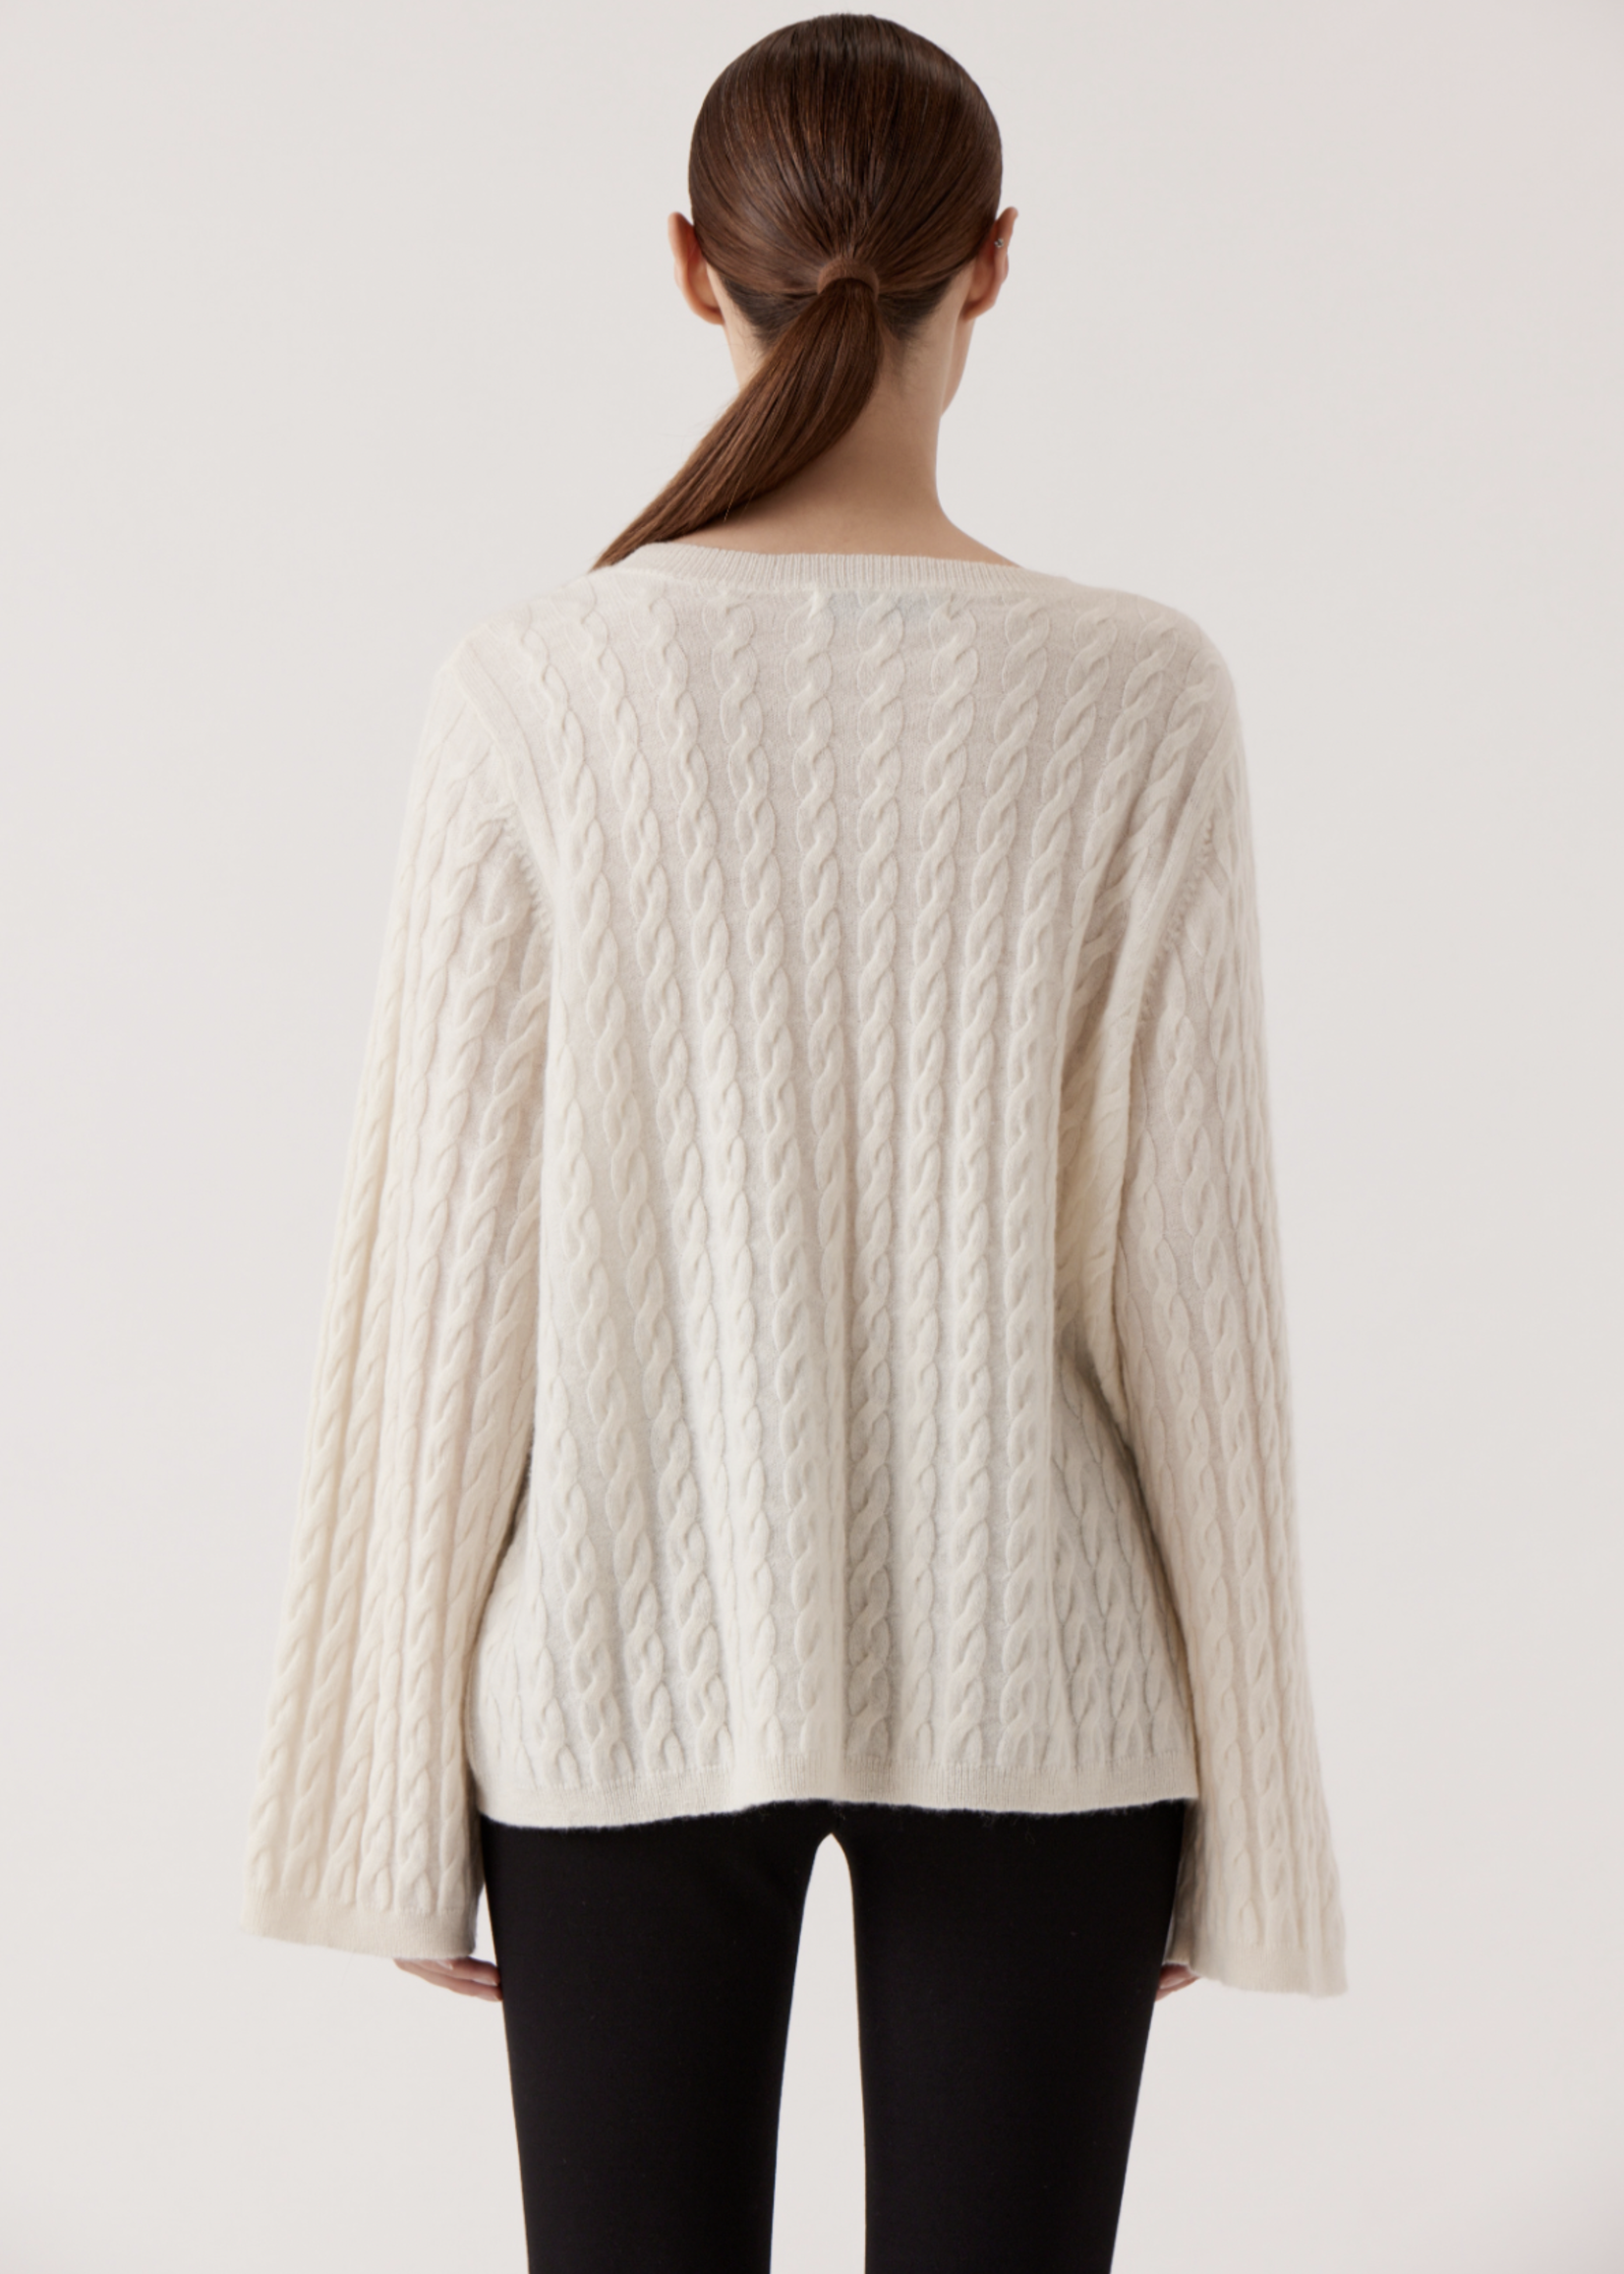 Elitaire Boutique Crewneck Cable Sweater in Ivory